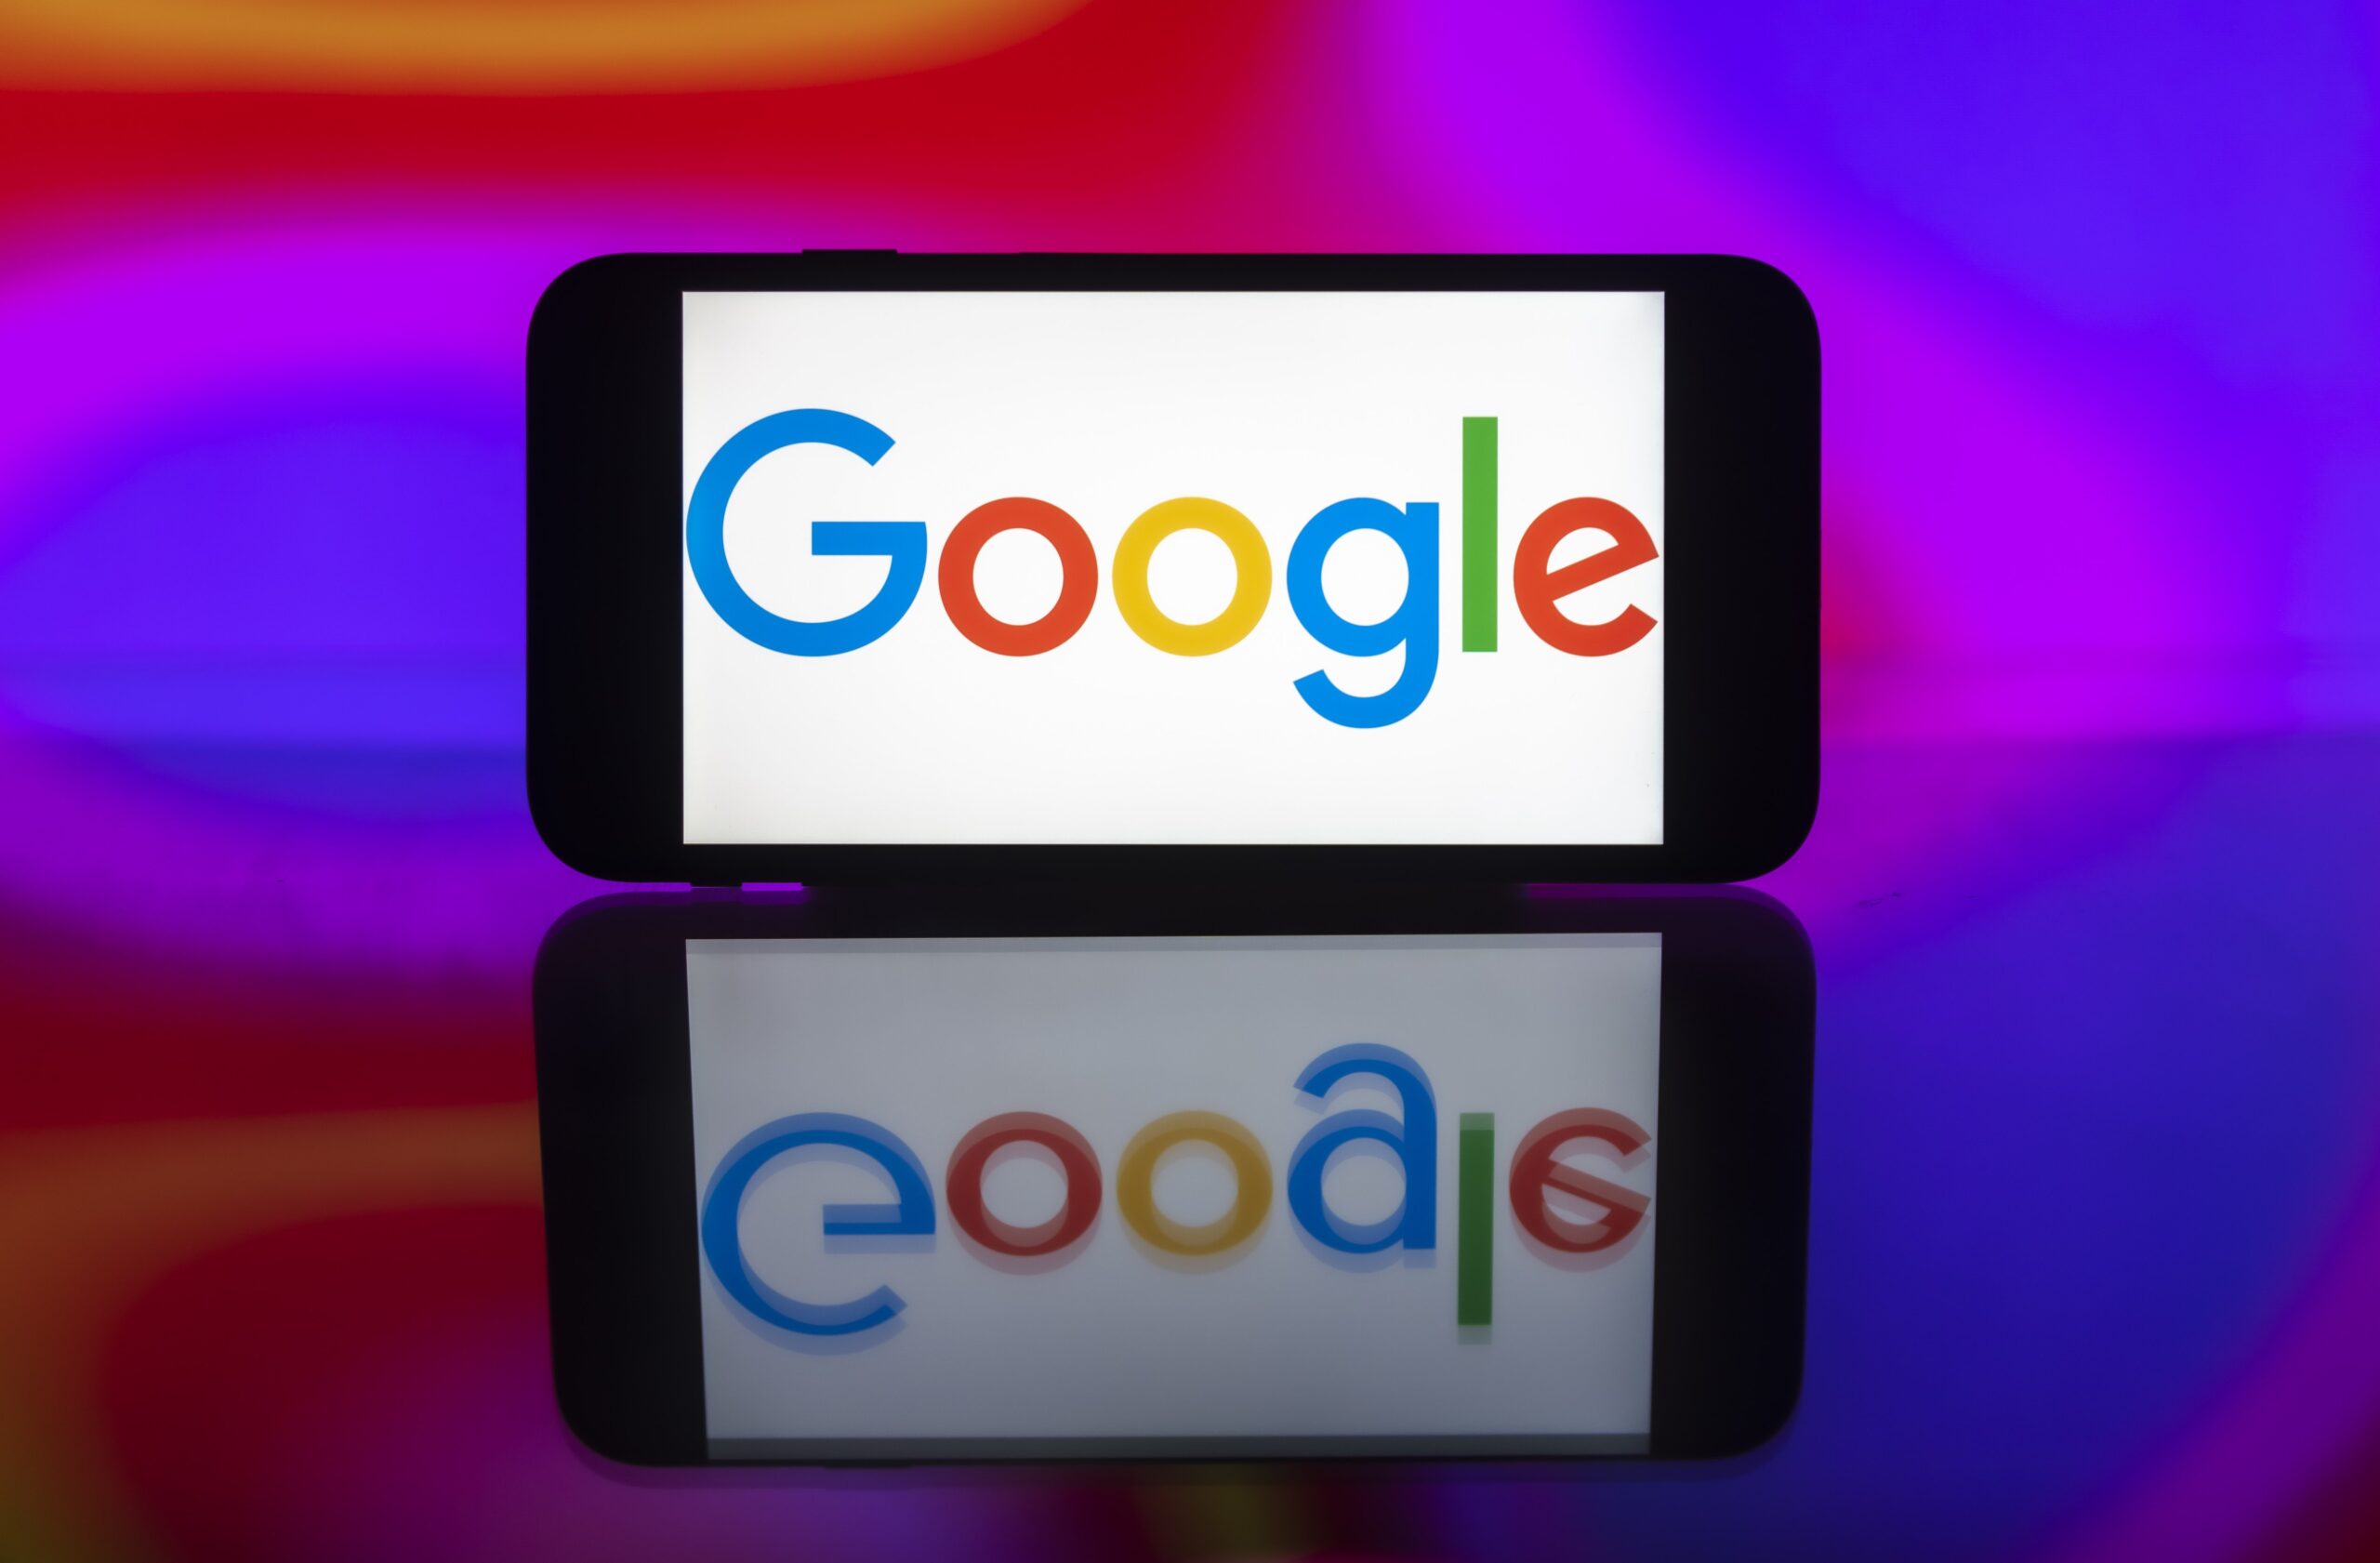 A phone showing the Google logo on a colorful, reflective backdrop.